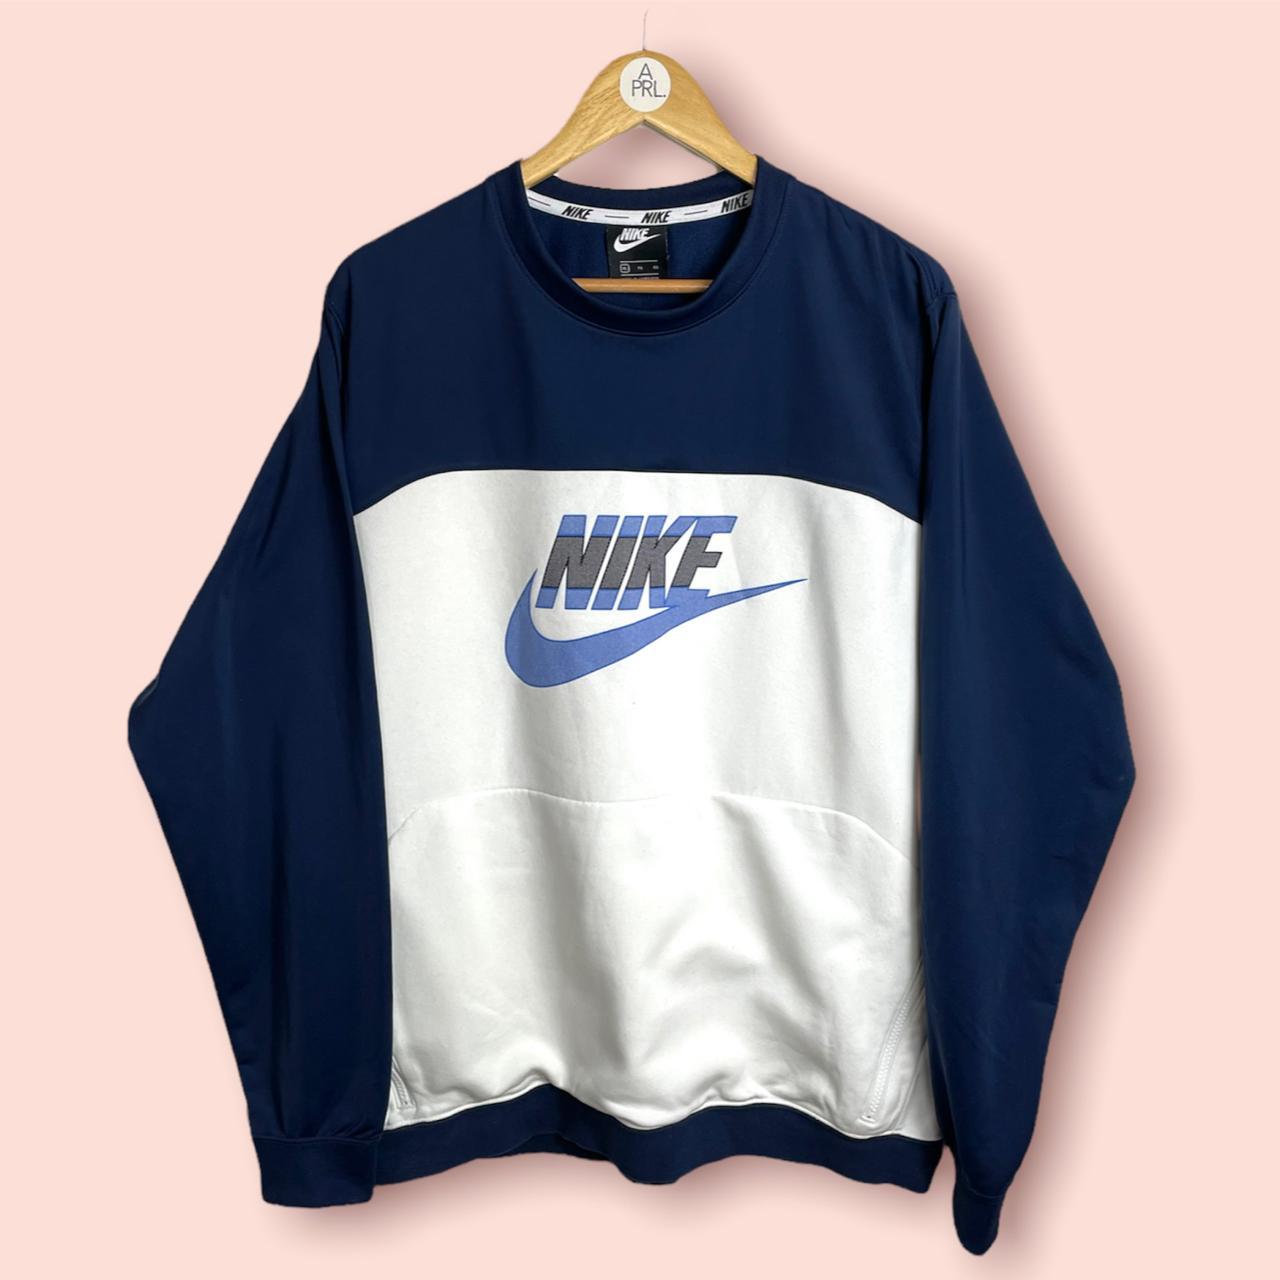 Nike Sweatshirt Size XL Pit to Pit 24 inches... - Depop